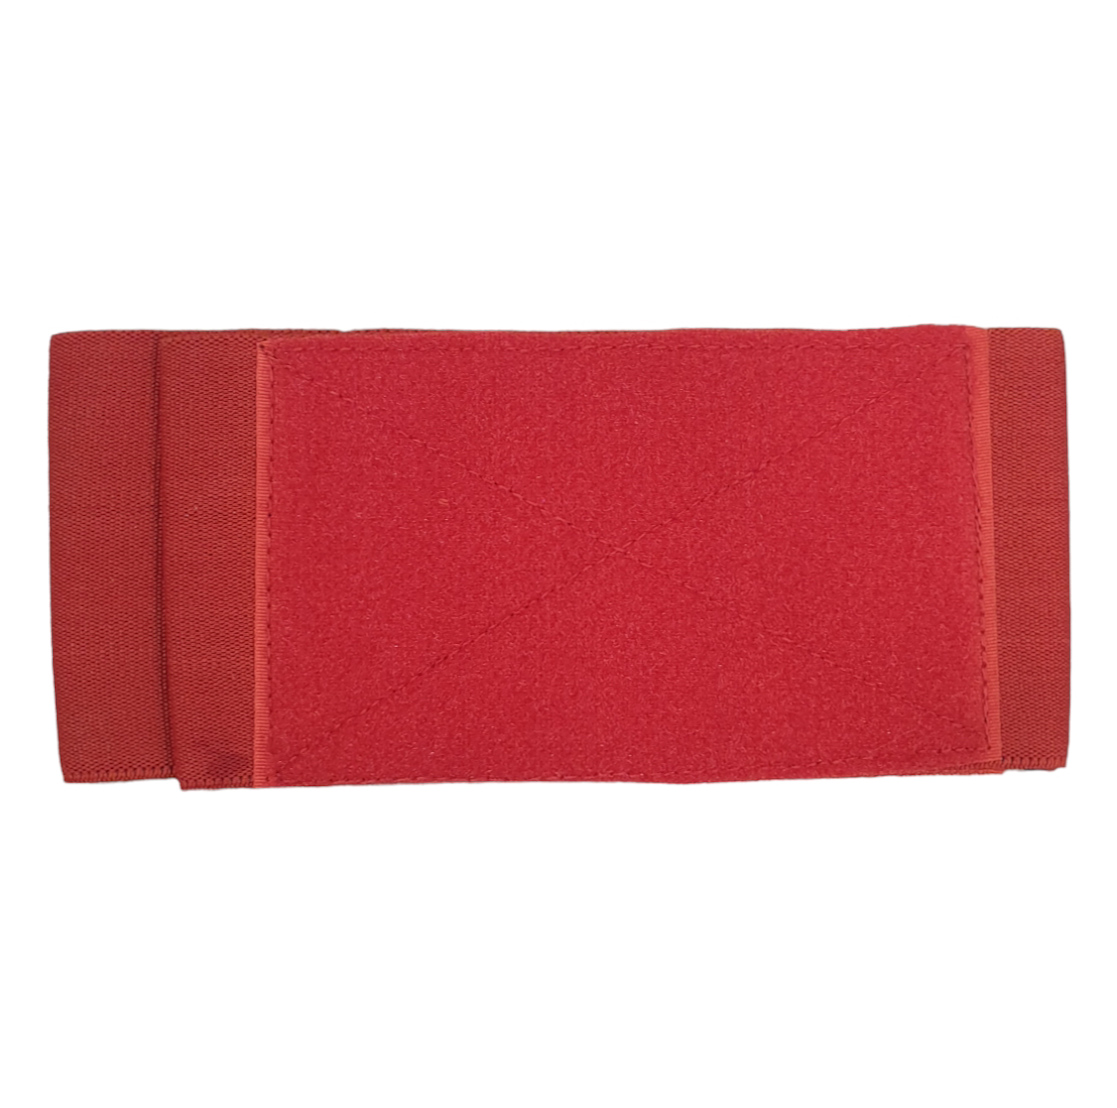 VolcAno Arm Band With Velcro, 3"Wide - Red